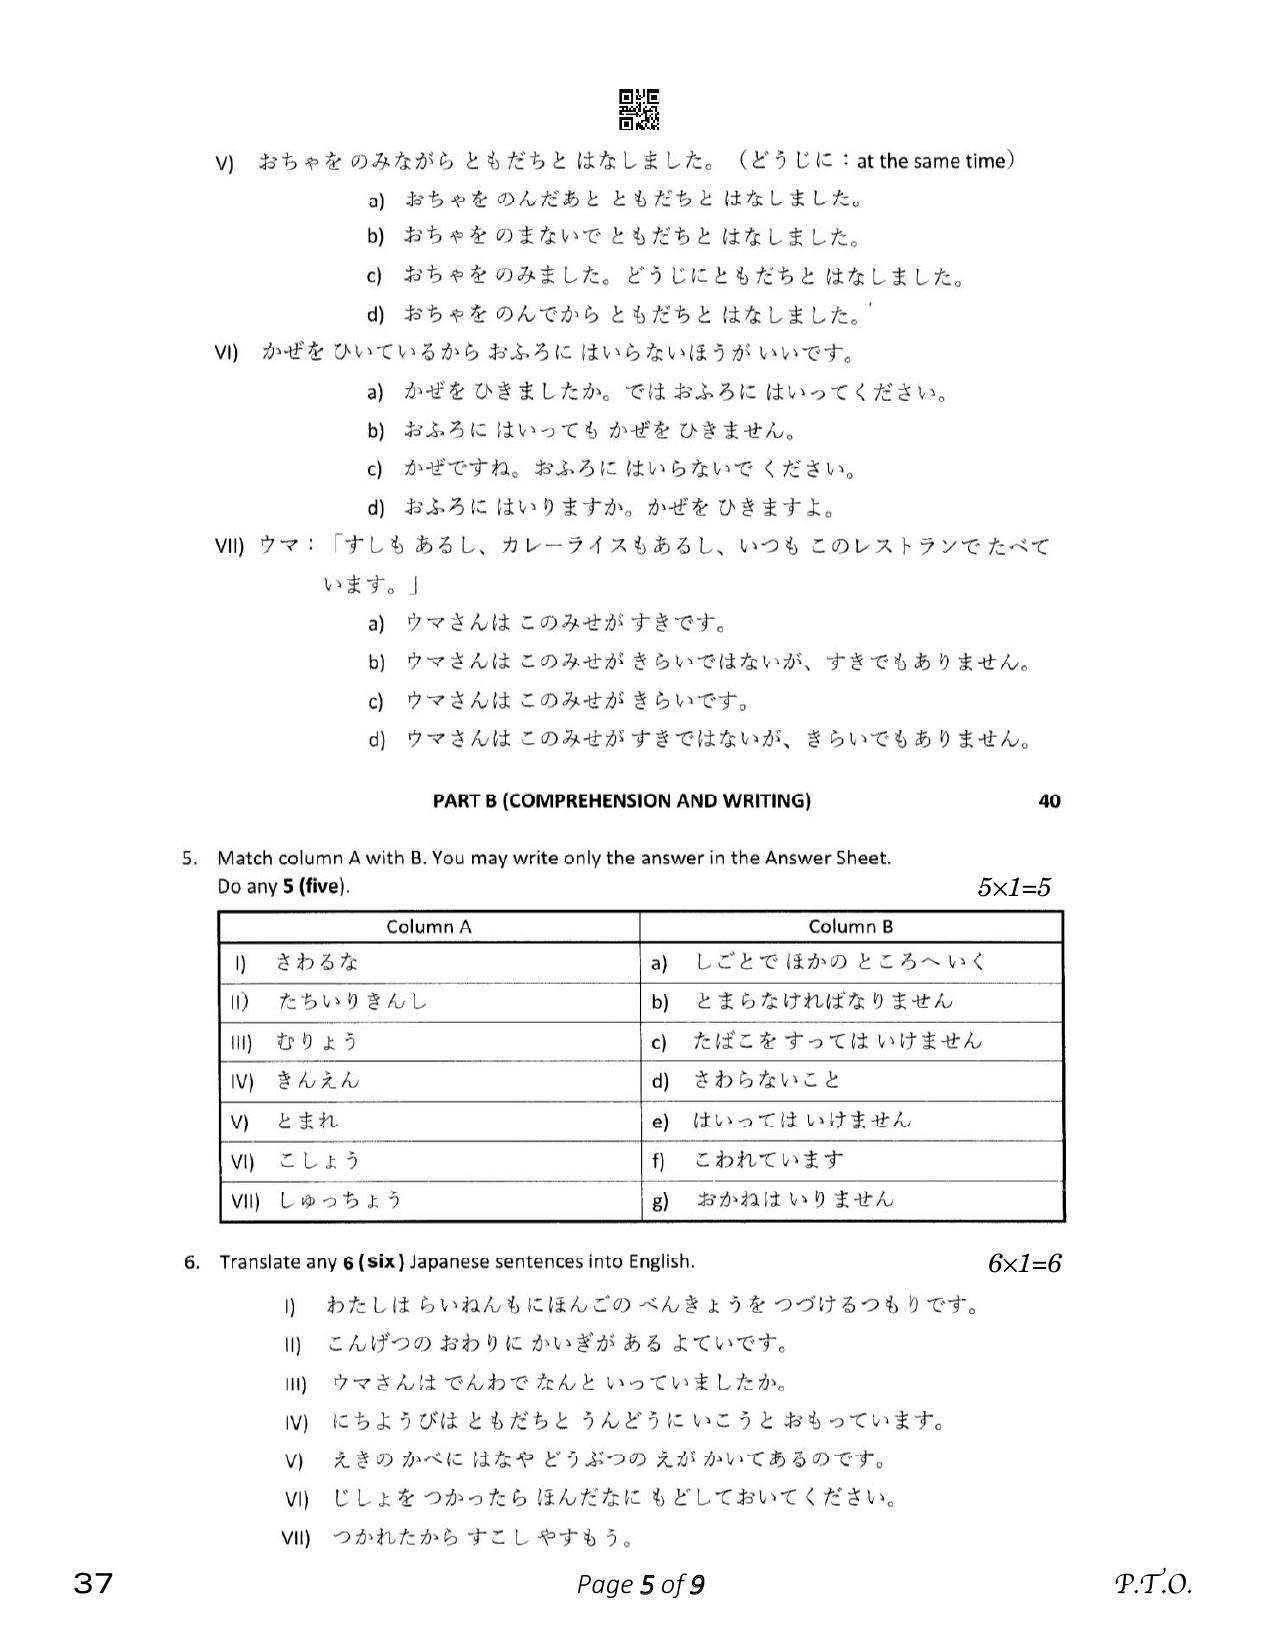 CBSE Class 12 Japanese (Compartment) 2023 Question Paper - Page 5